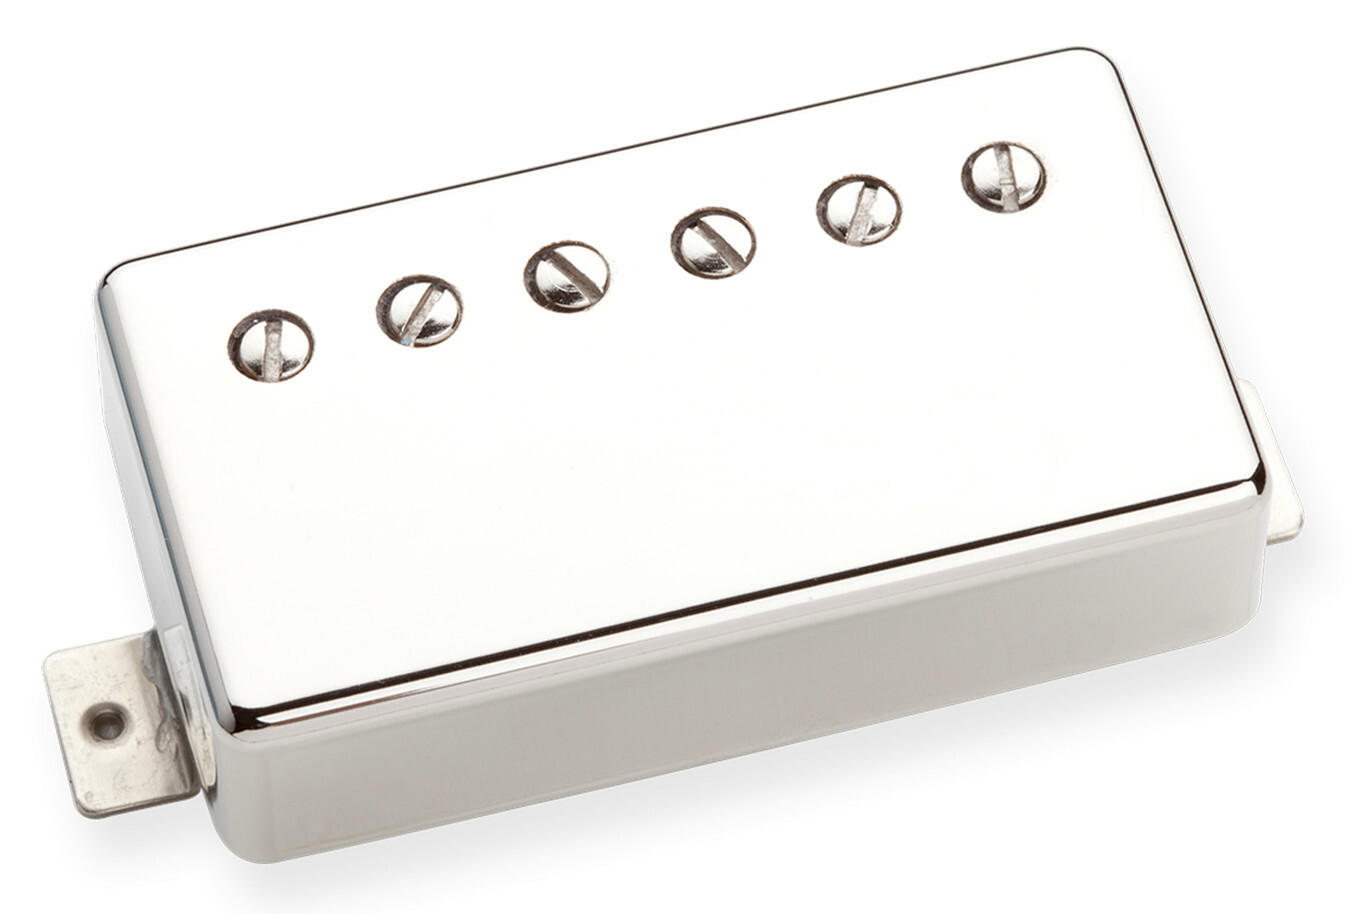 Seymour Duncan SH-55n - Seth Lover Neck Humbucker, 4 Cond. Cable - Nickel Cover